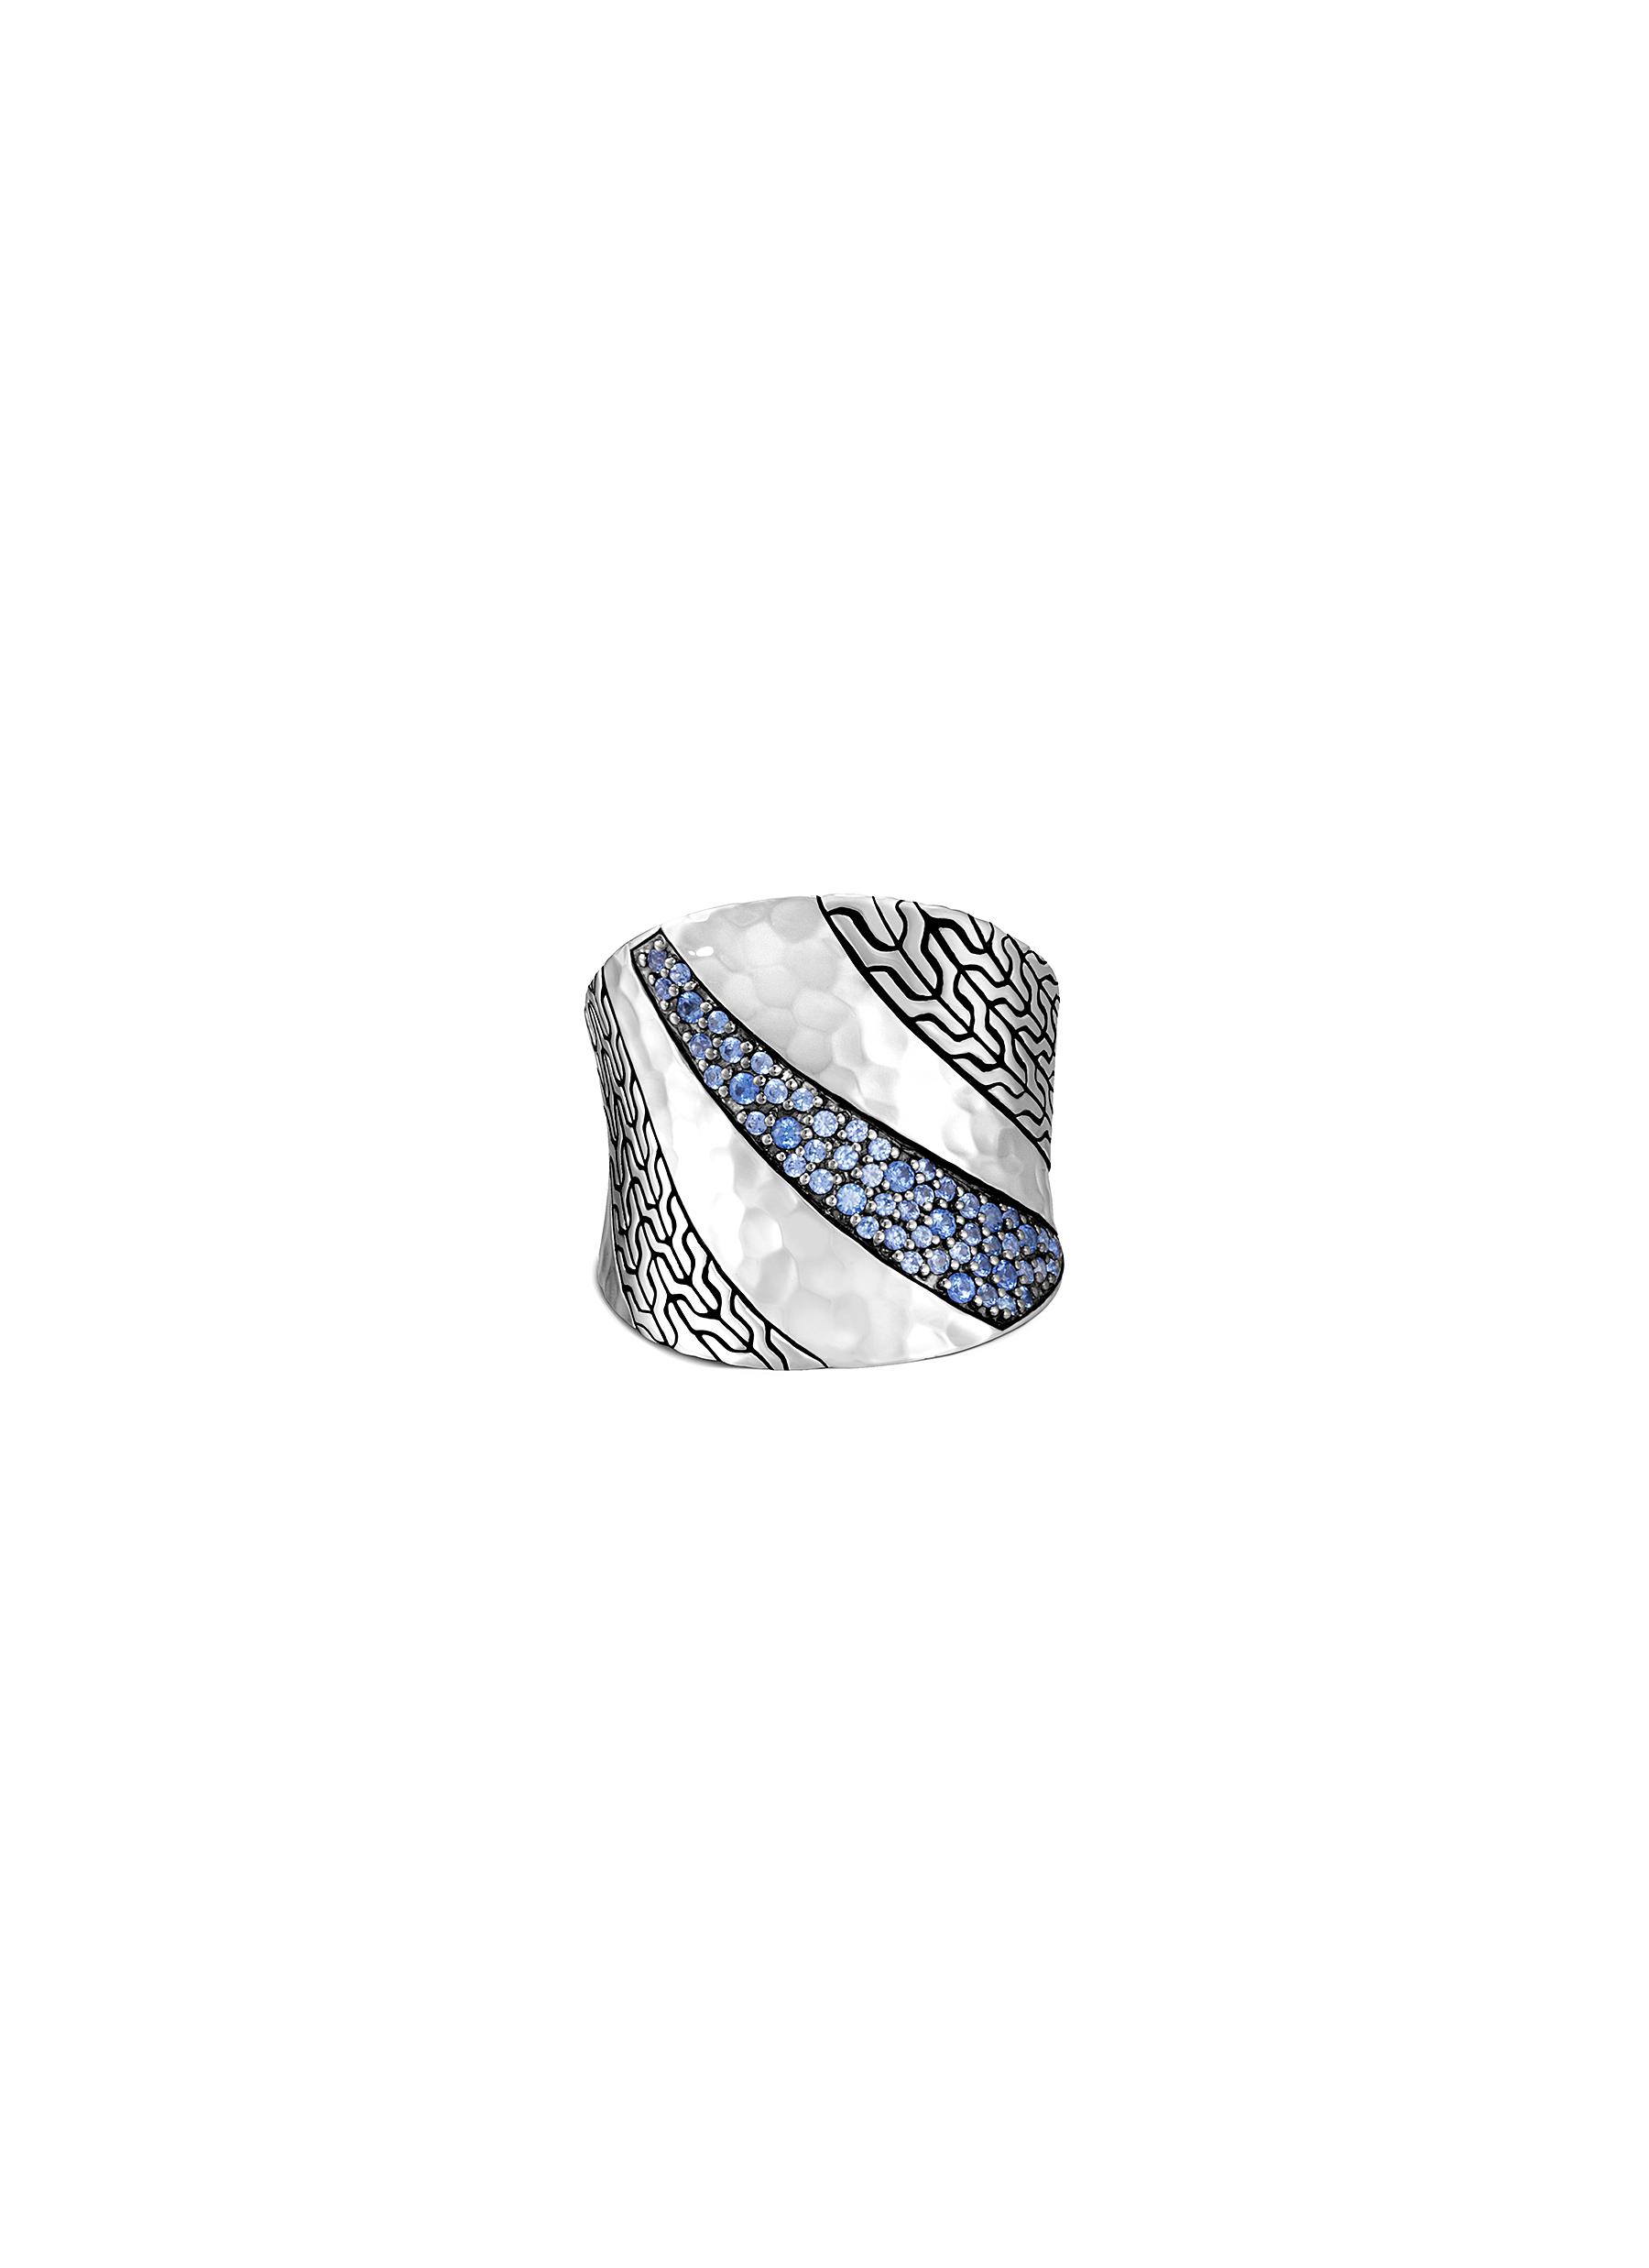 JOHN HARDY ‘CLASSIC CHAIN' SAPPHIRE HAMMERED SILVER SADDLE RING